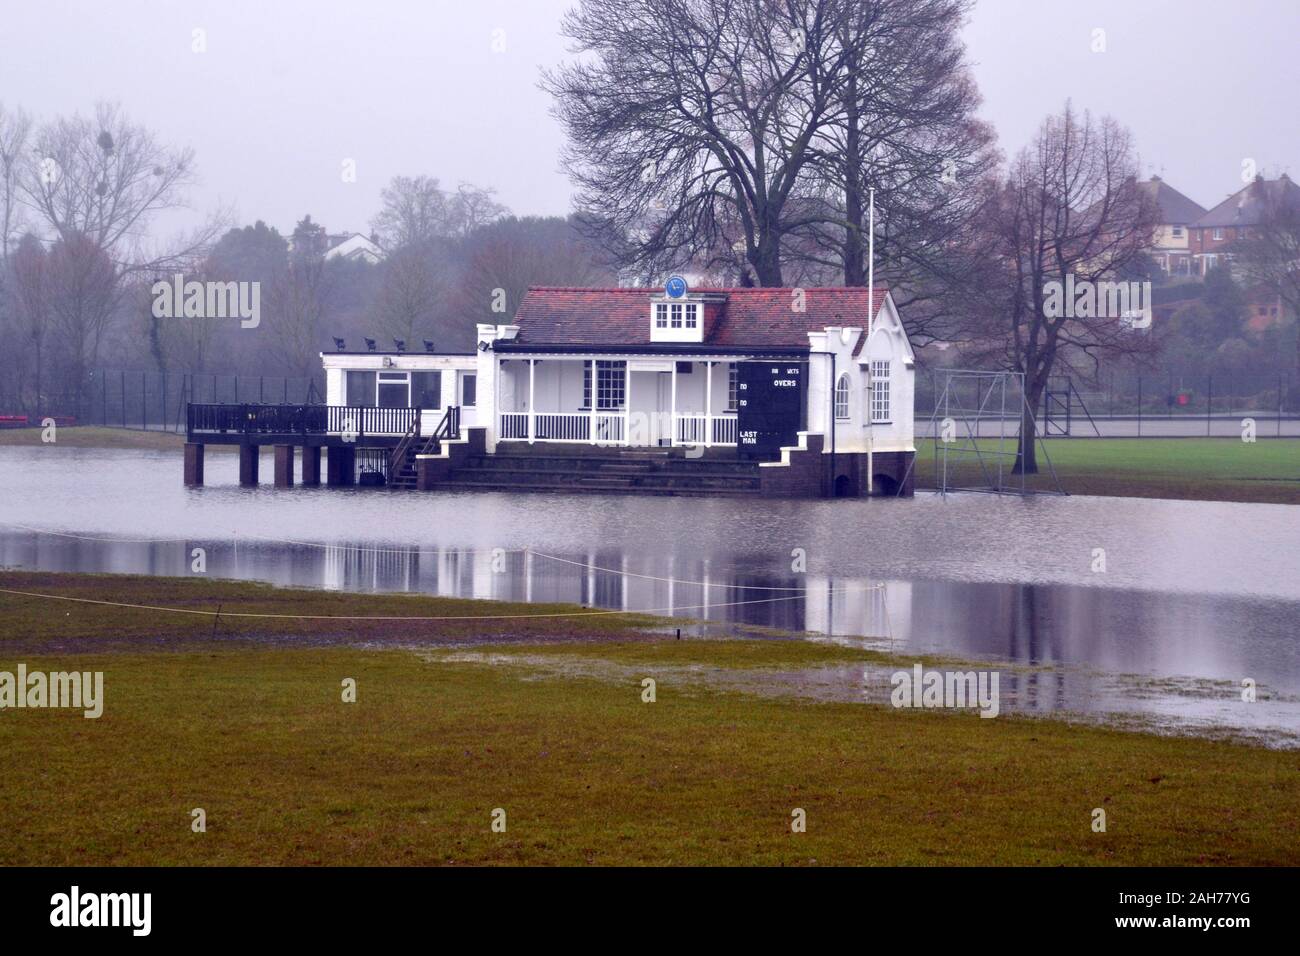 Worcestershire County Cricket Club Pavilion surrounded by flood water on Boxing Day, 2019. The Midlands and Southern England suffered floods during the approach to Christmas. UK media reported that leading politicians have called on Prime Minister Boris Johnson to overhaul the system for deciding where flood-defence funding is spent and launch an emergency response unit to prevent a repeat of the “catastrophic” damage caused by the November floods. Stock Photo